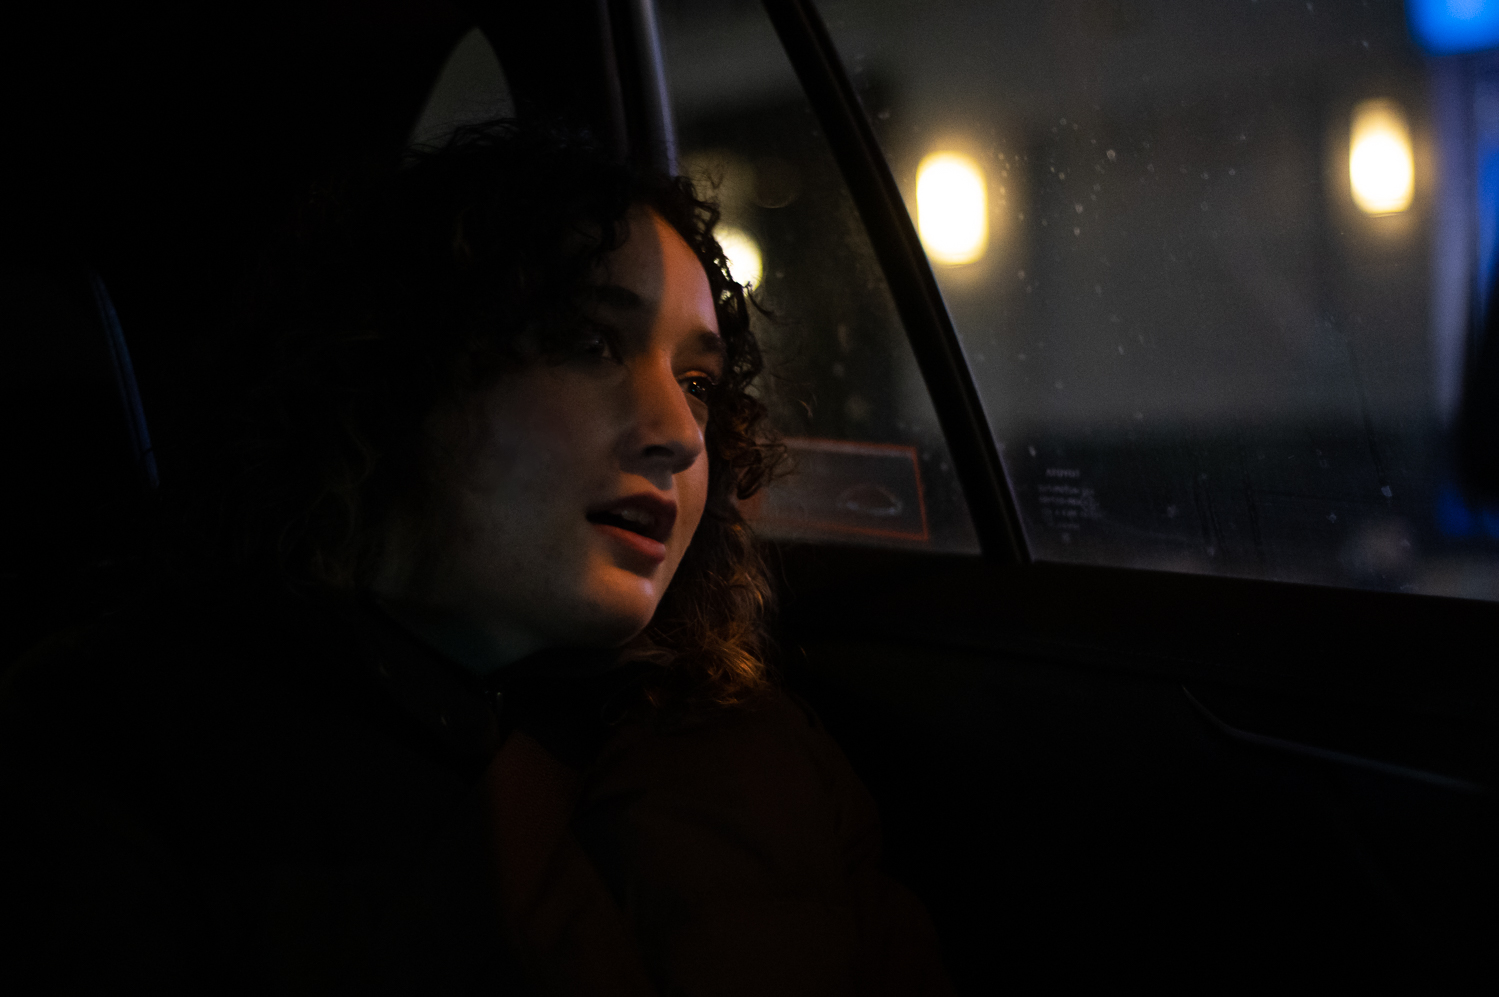 A woman with curly hair and half her face dulled by shadows sits at the window seat in a car. It is nighttime outside the window.